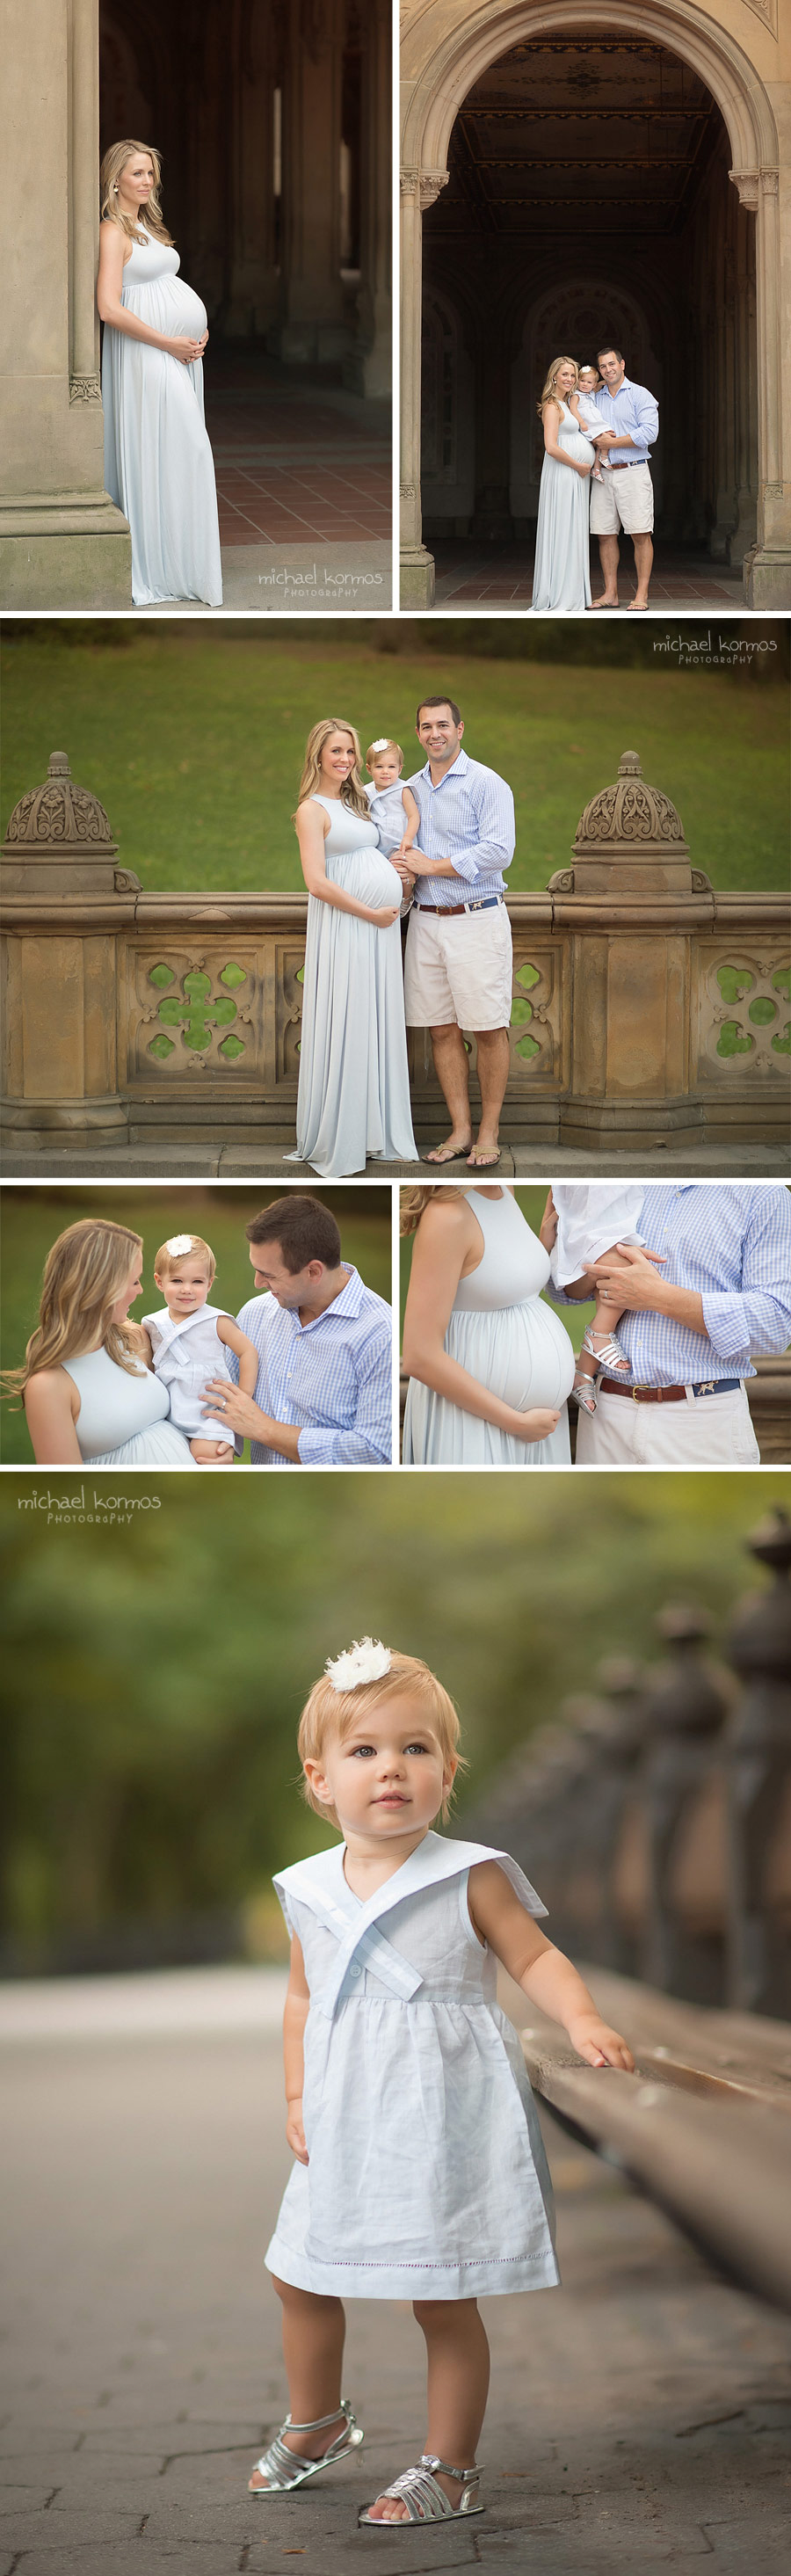 lifestyle maternity photography central park